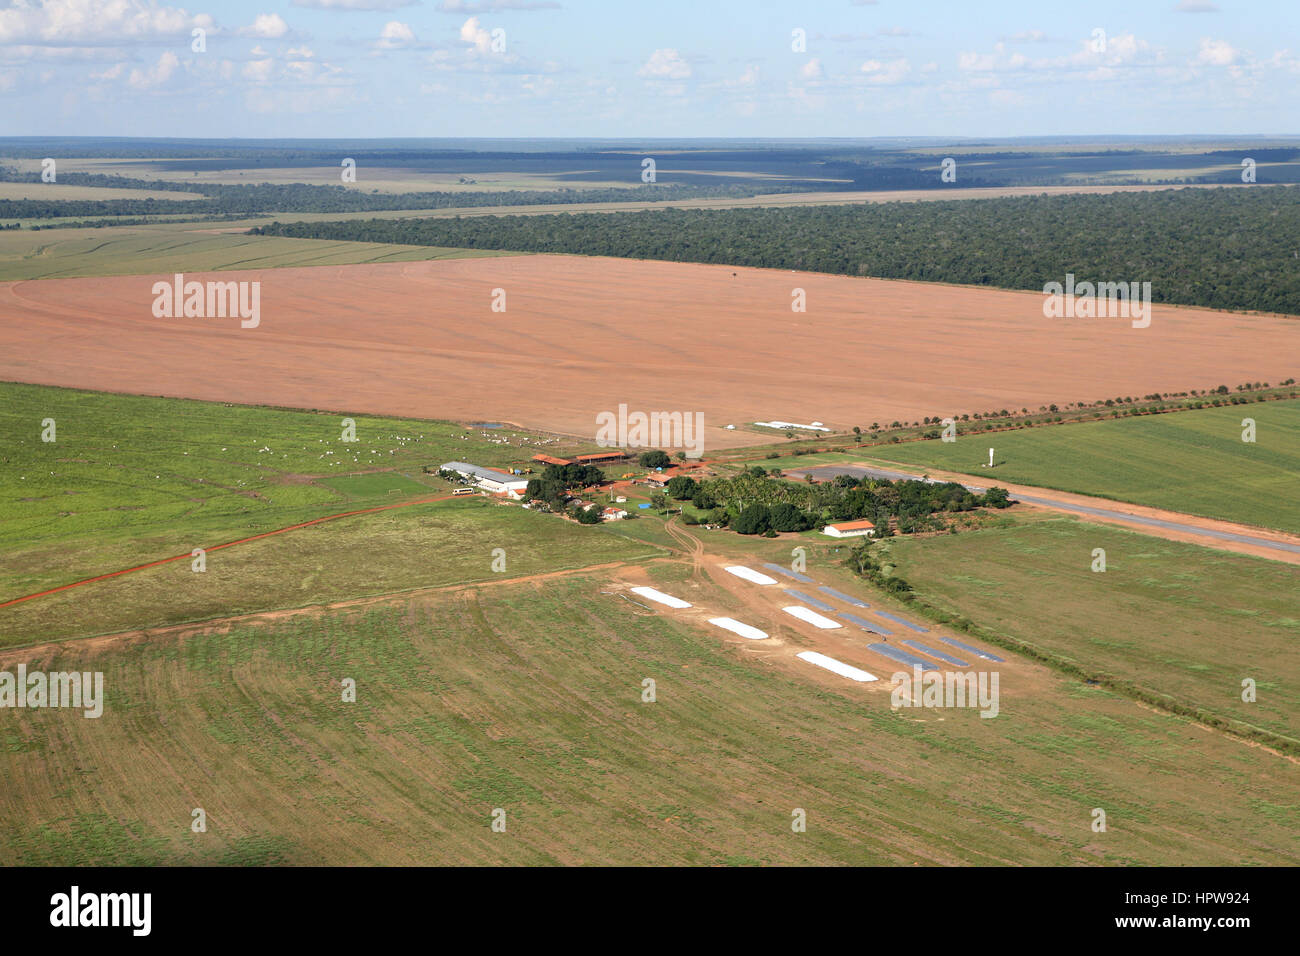 A lrage part of the Amazone has been destroyed and transferred into farmland. The main crops being cultivated are soya, grass for cattle, and maize. Most of the crops are being used for the production of biofuel or exported to the Europe or US for animal fodder Stock Photo